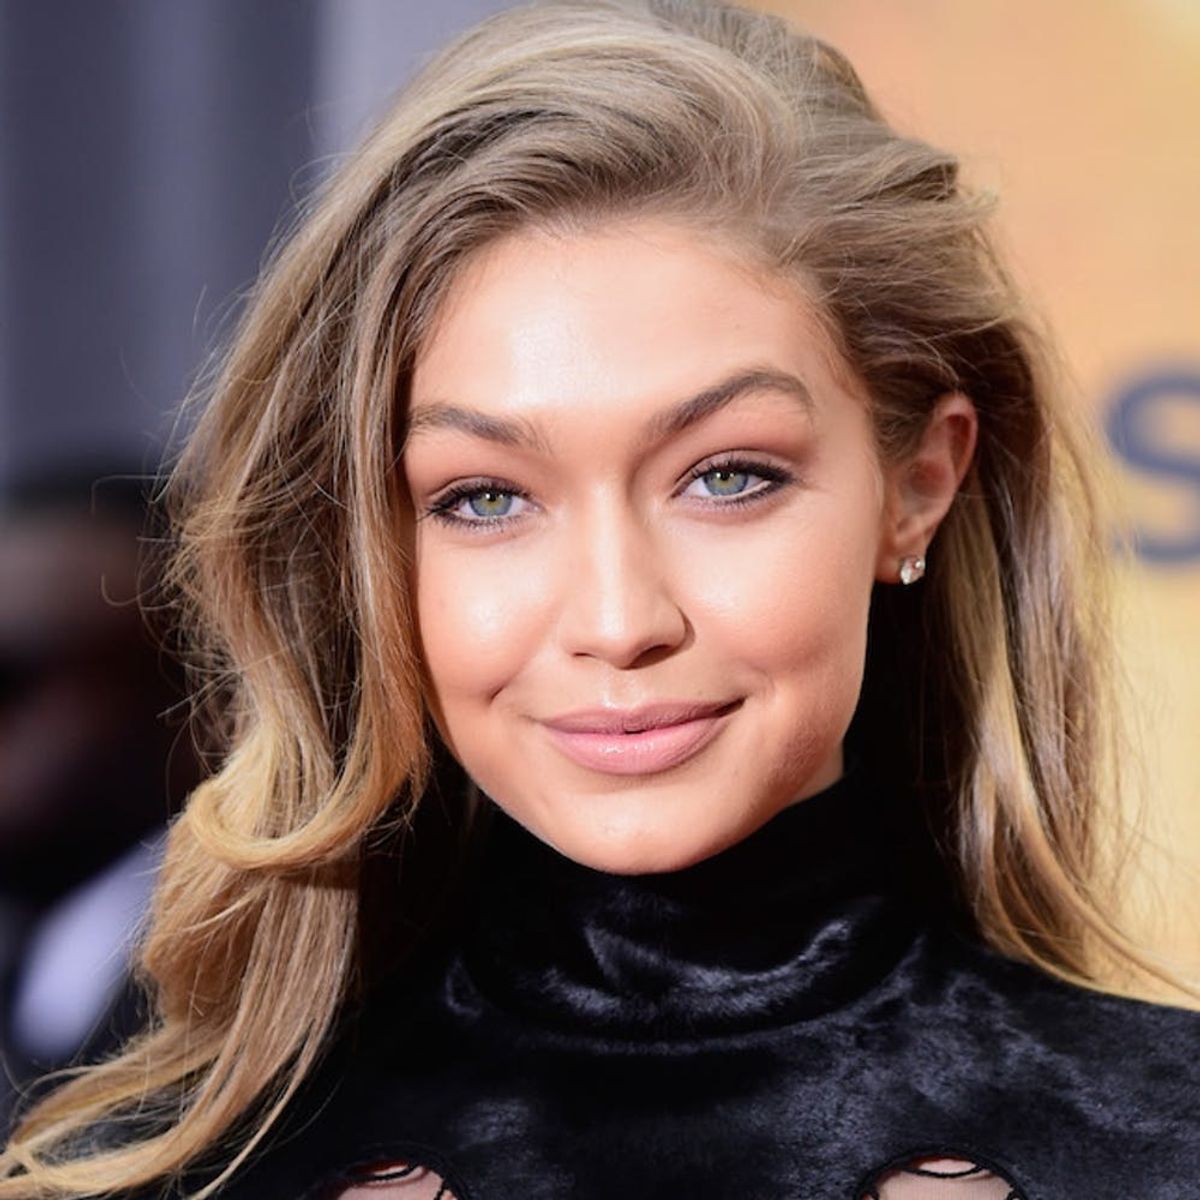 Get the Look of Gigi Hadid’s Minimal + Glam NY Home - Brit + Co